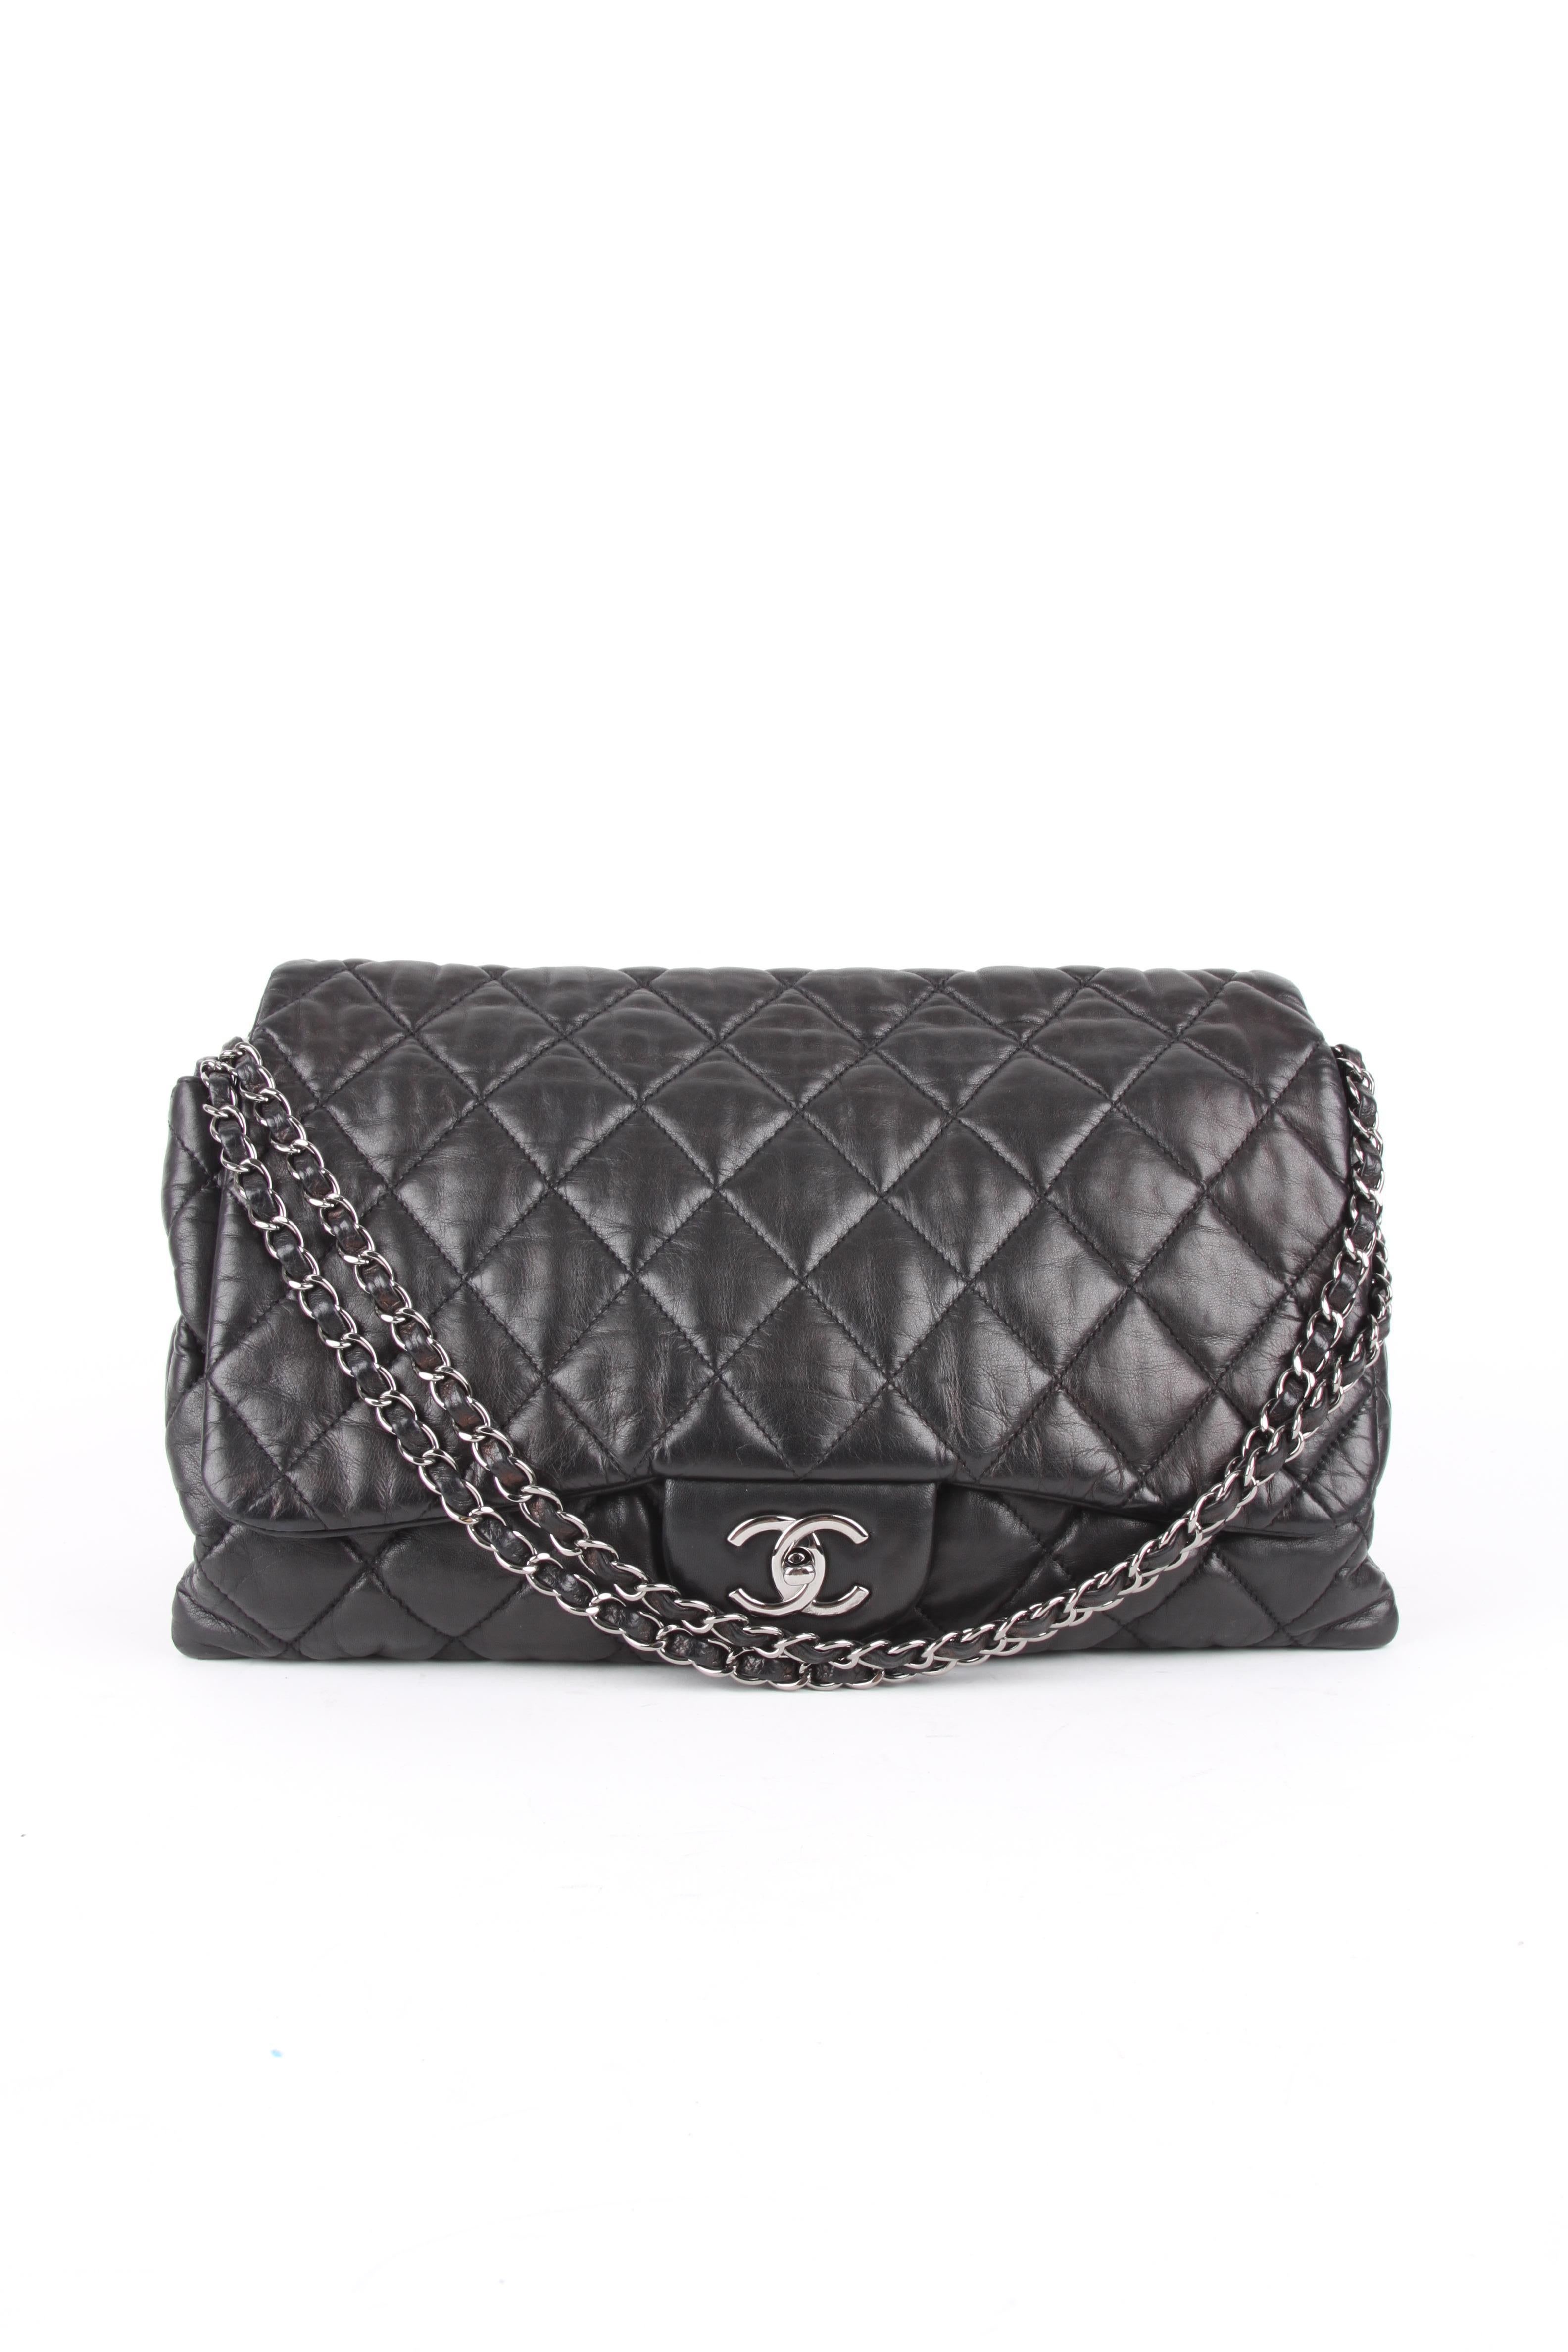 Chanel 3 Quilted Accordion Lambskin Maxi Flap Bag 5